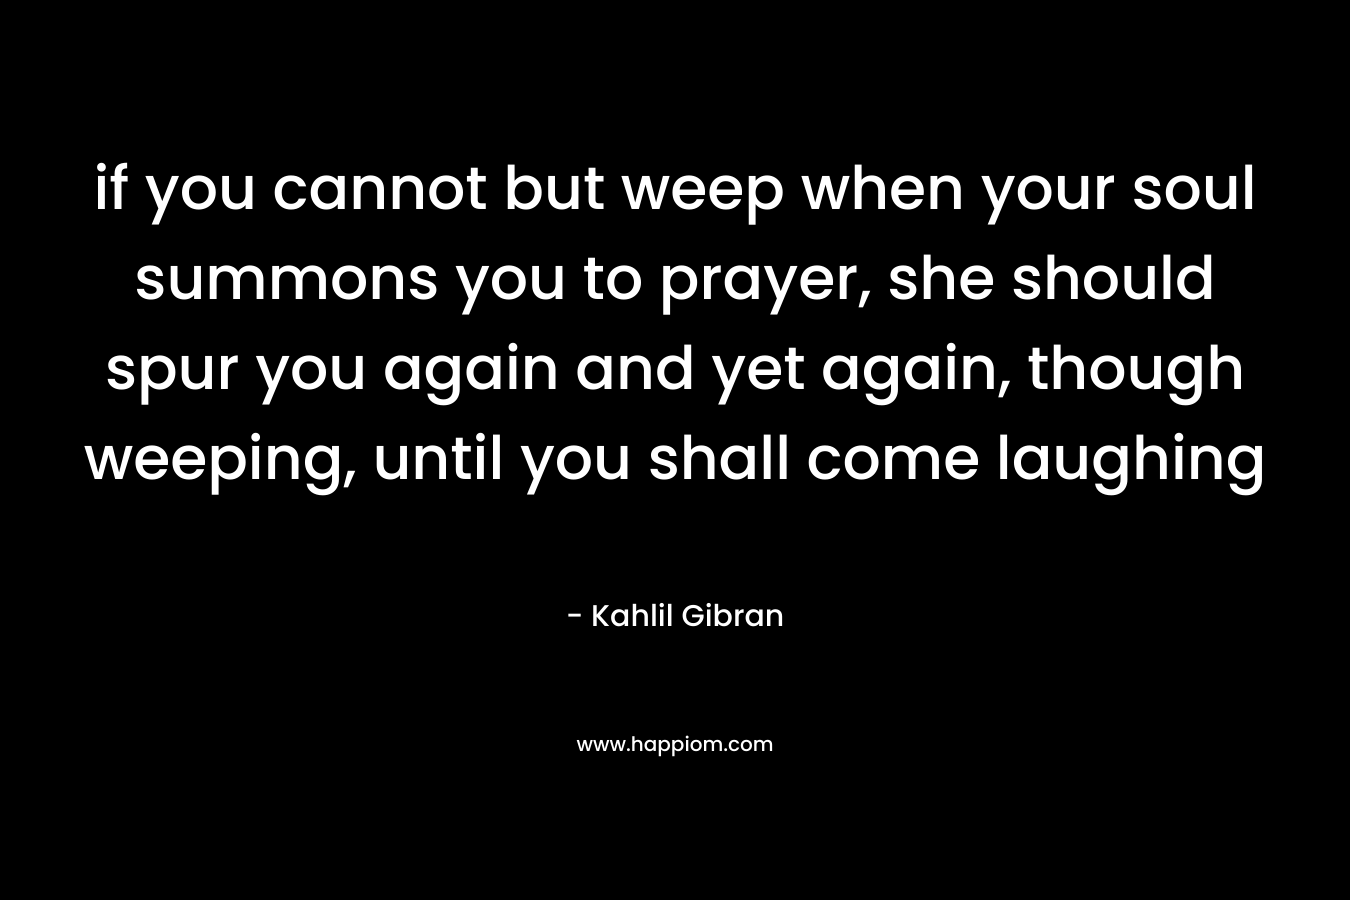 if you cannot but weep when your soul summons you to prayer, she should spur you again and yet again, though weeping, until you shall come laughing – Kahlil Gibran